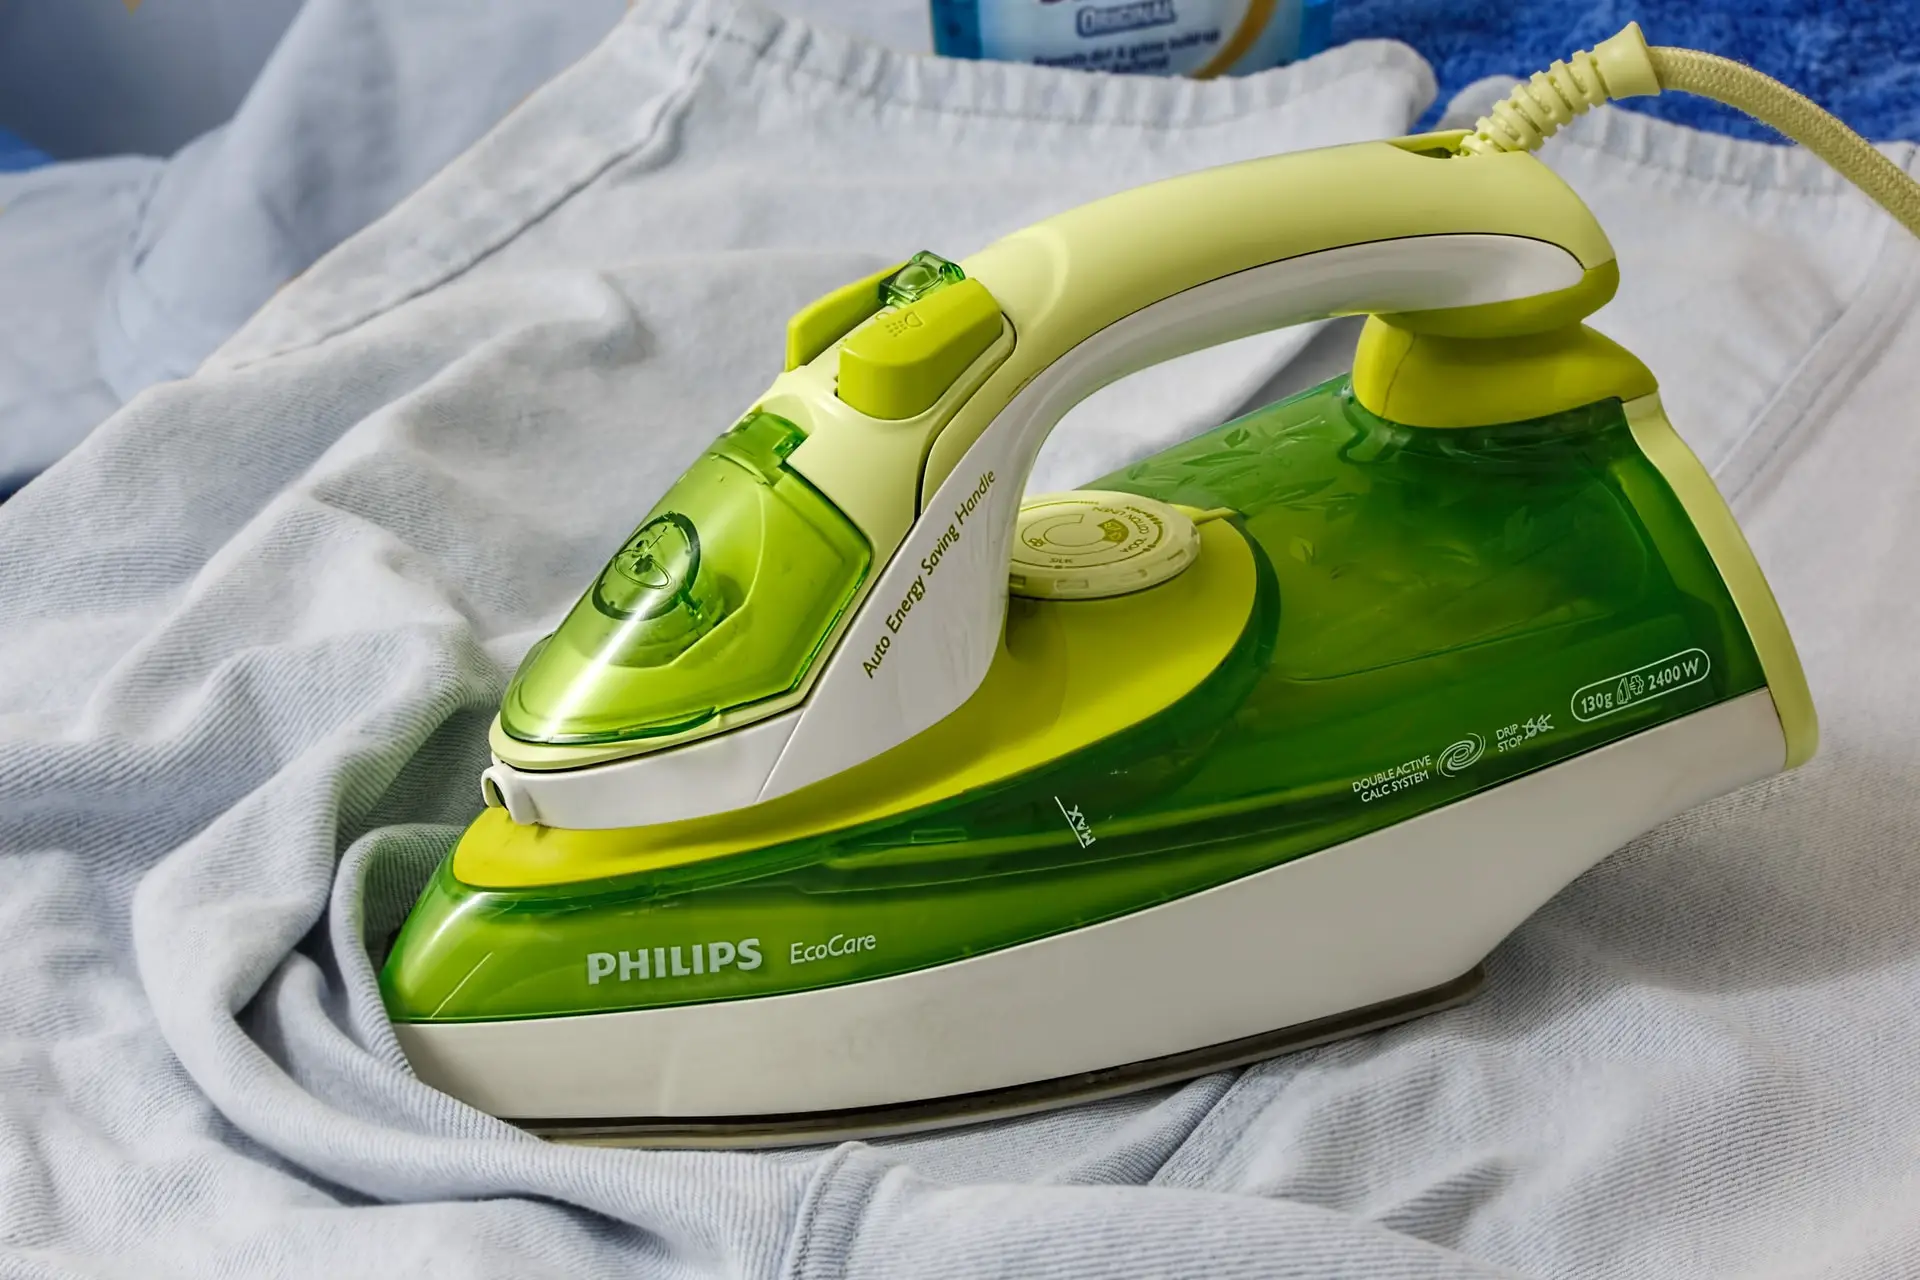 Do hotel rooms in Europe have irons?